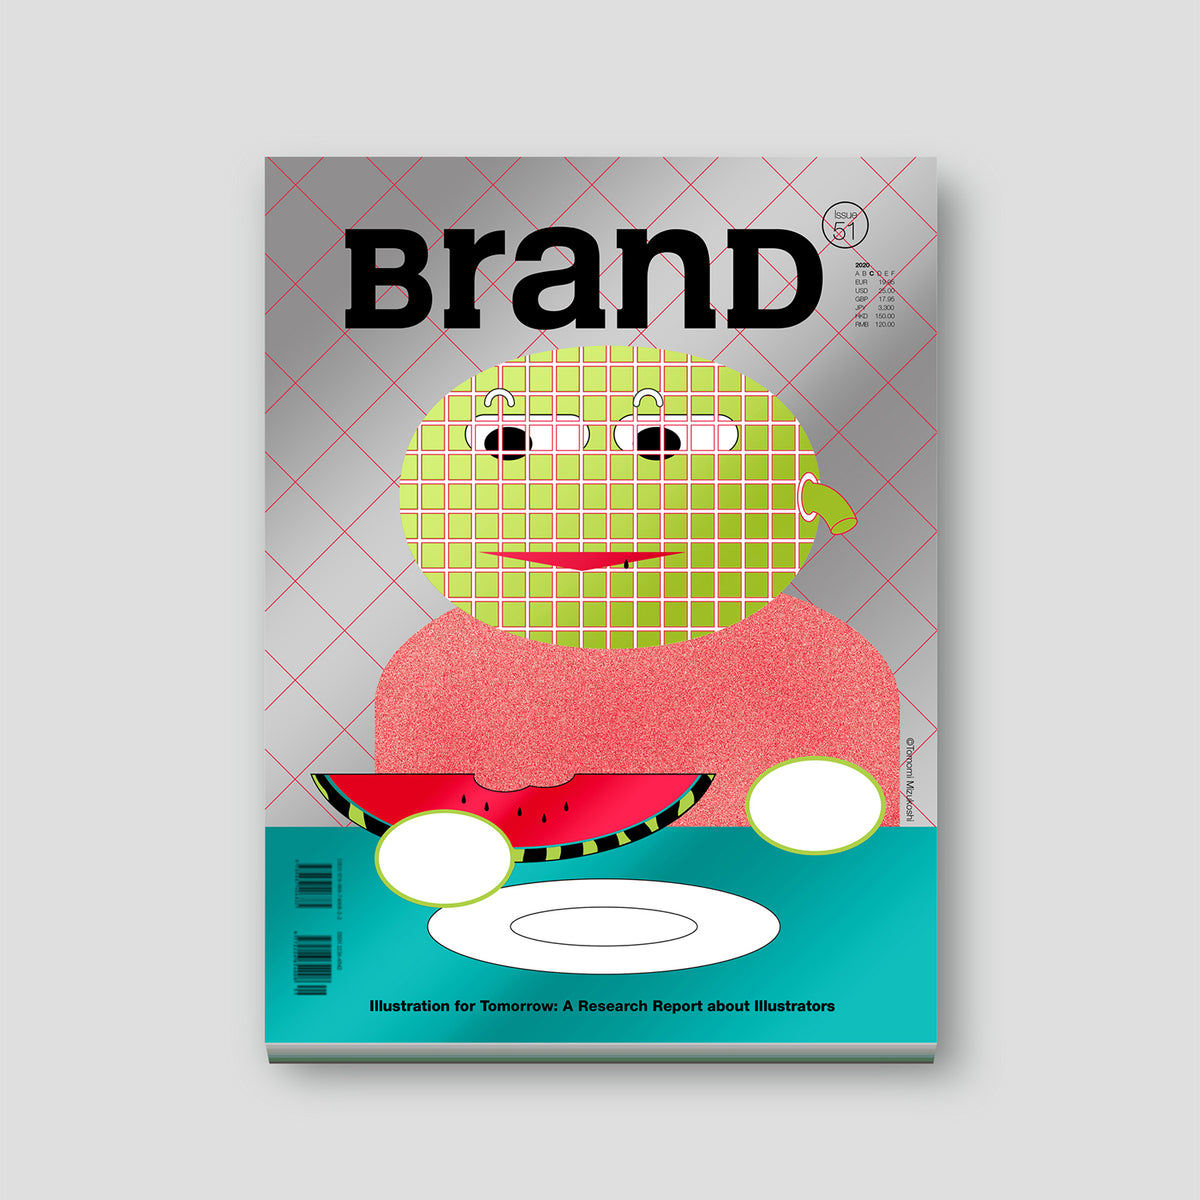 BranD Magazine Issue 51,Credits:Illustration,Year: 2020,Country: Hong Kong,Client: BranD Magazine